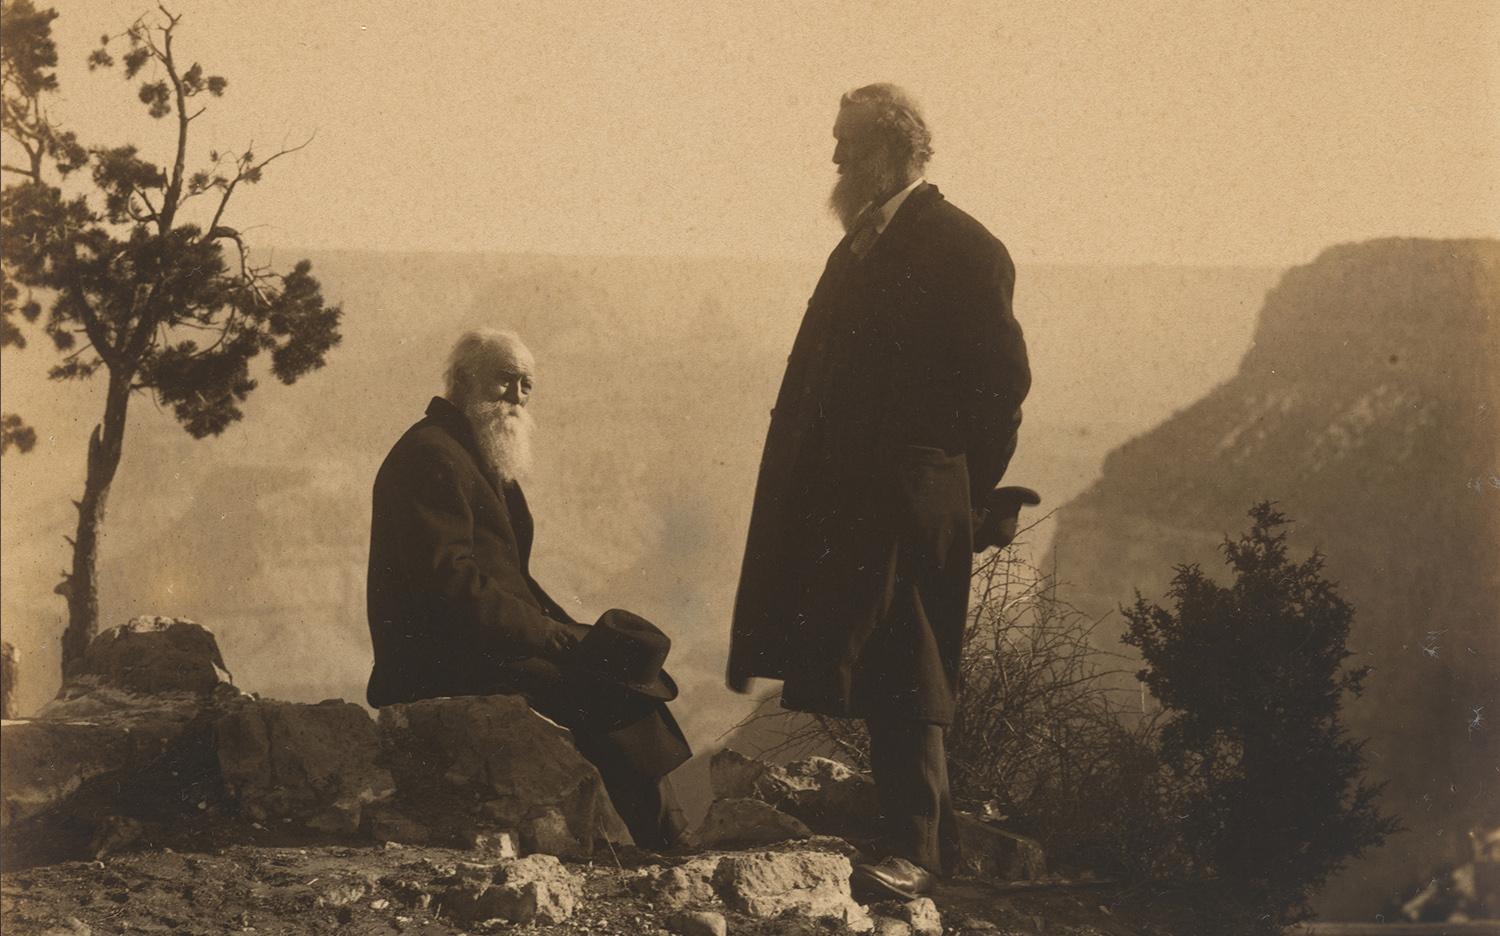 sepia-tinted photo of two men standing on a mountaintop